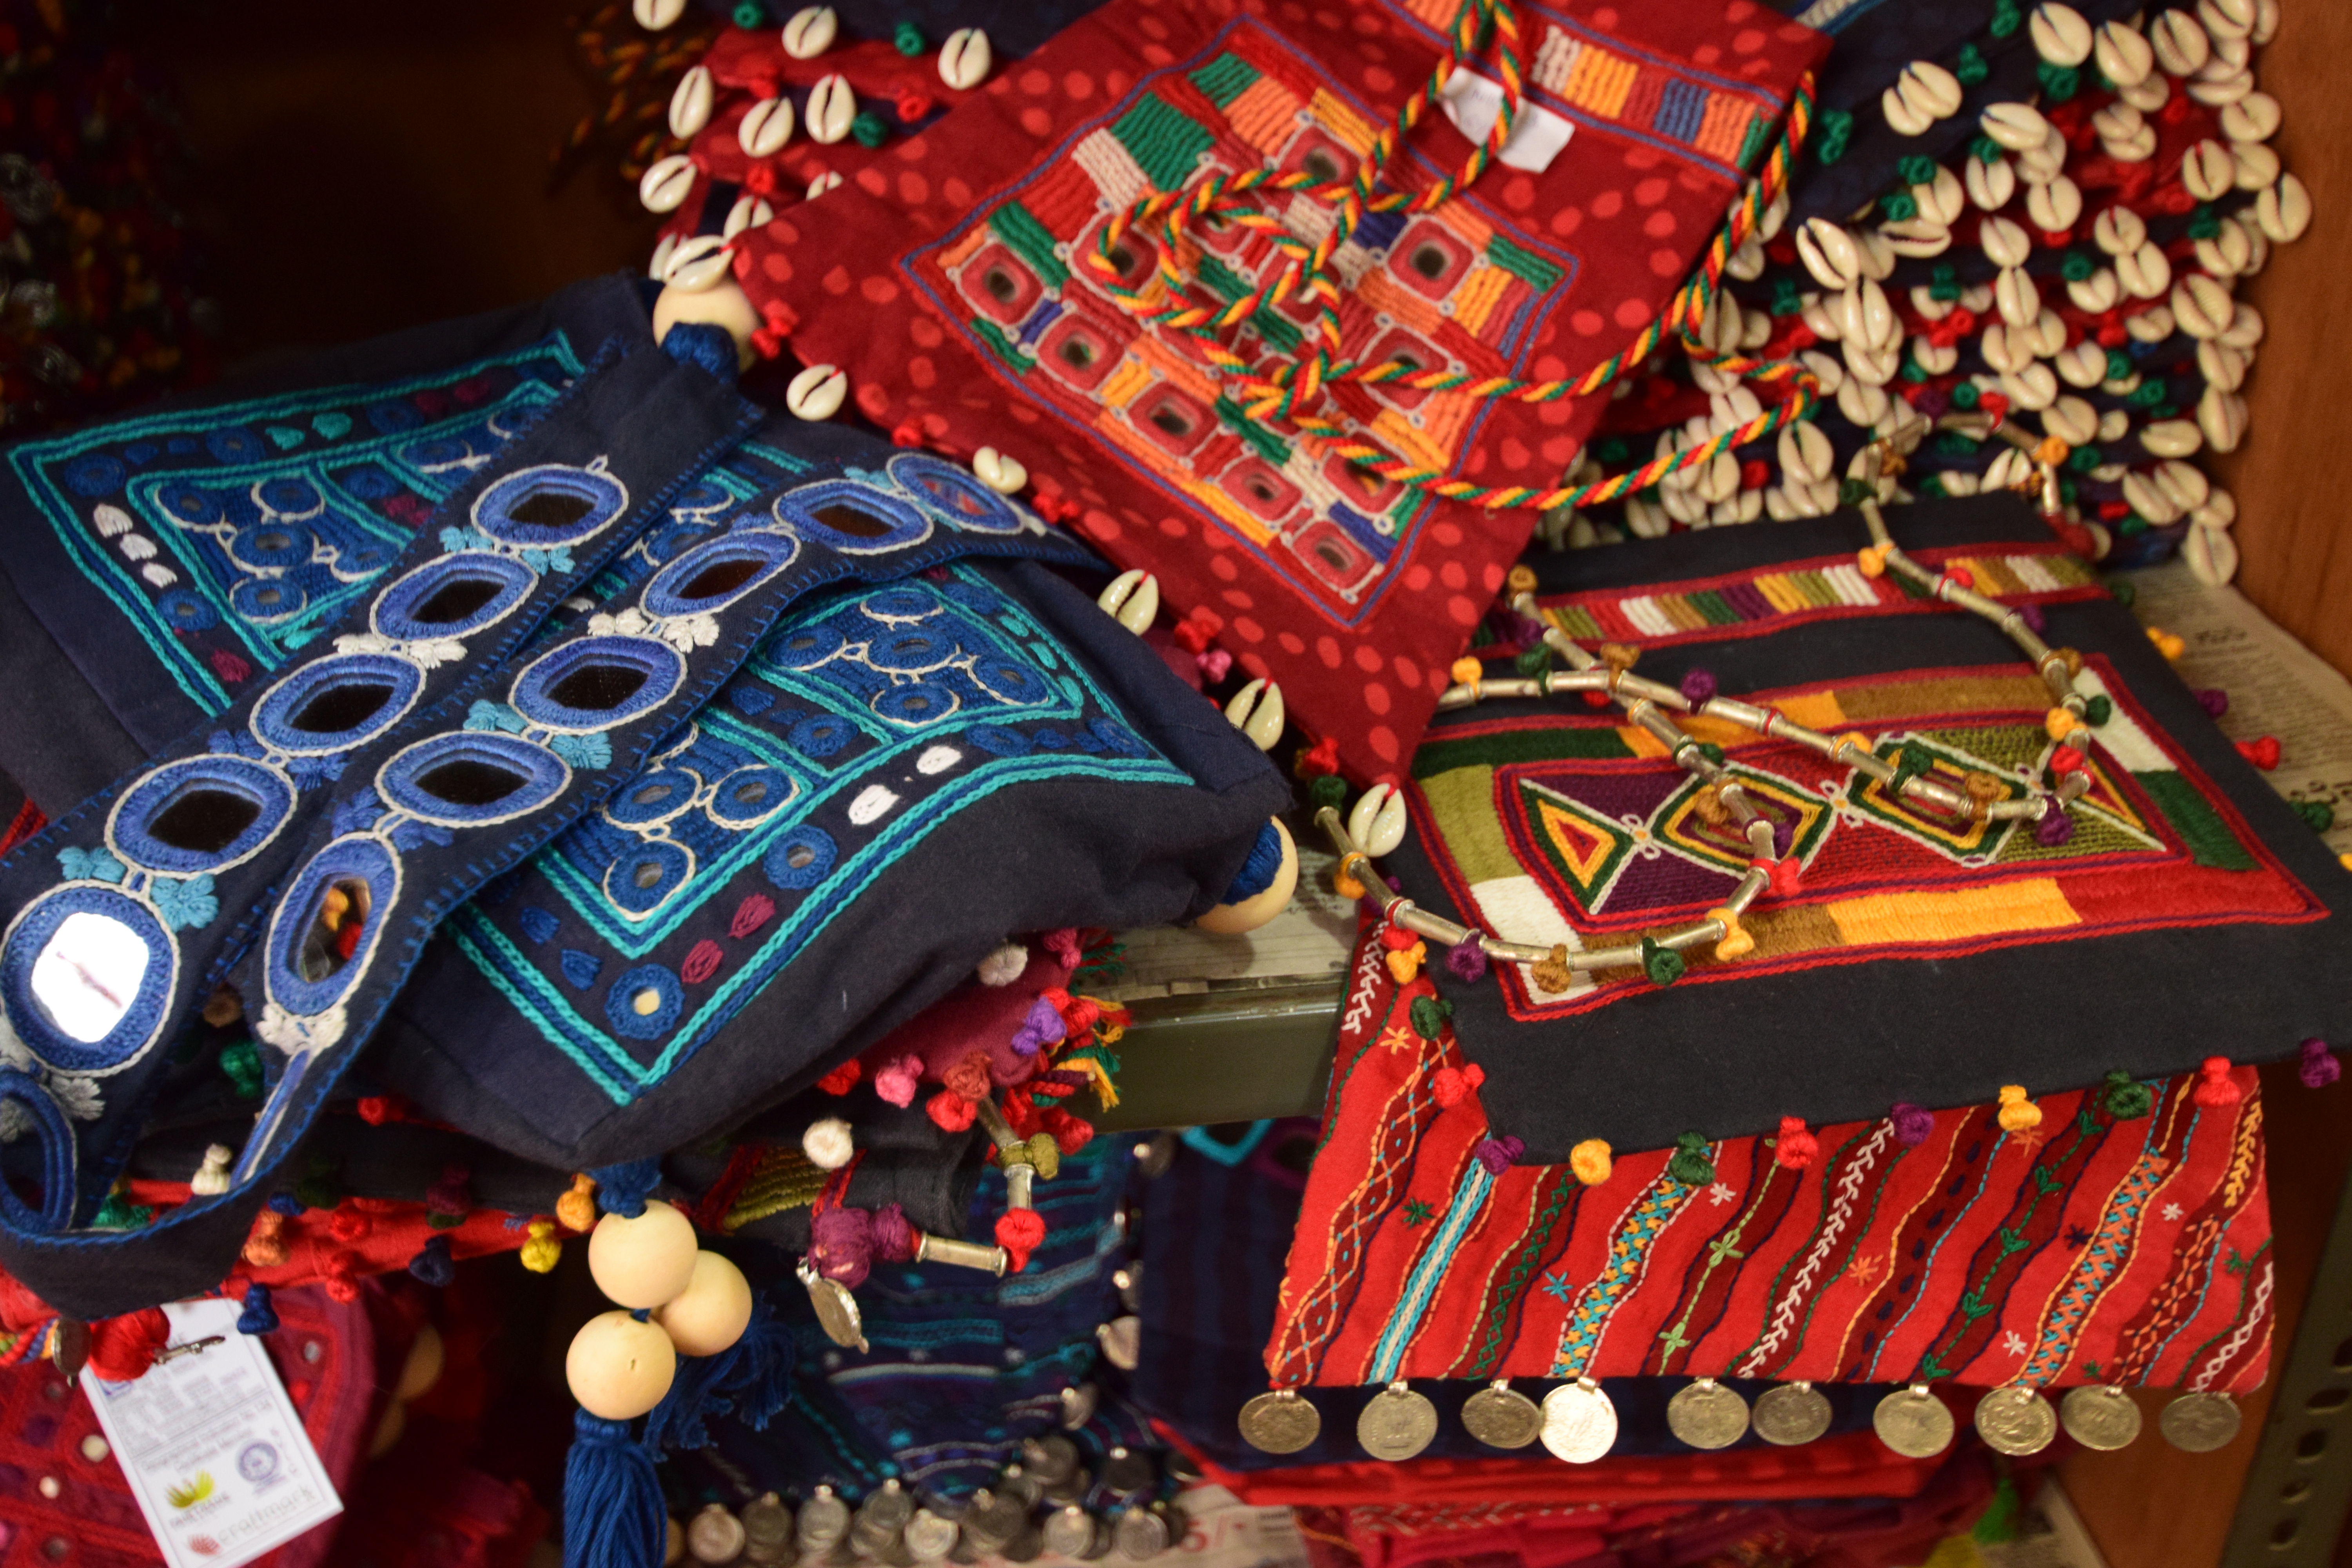 Some of the colorful handbags